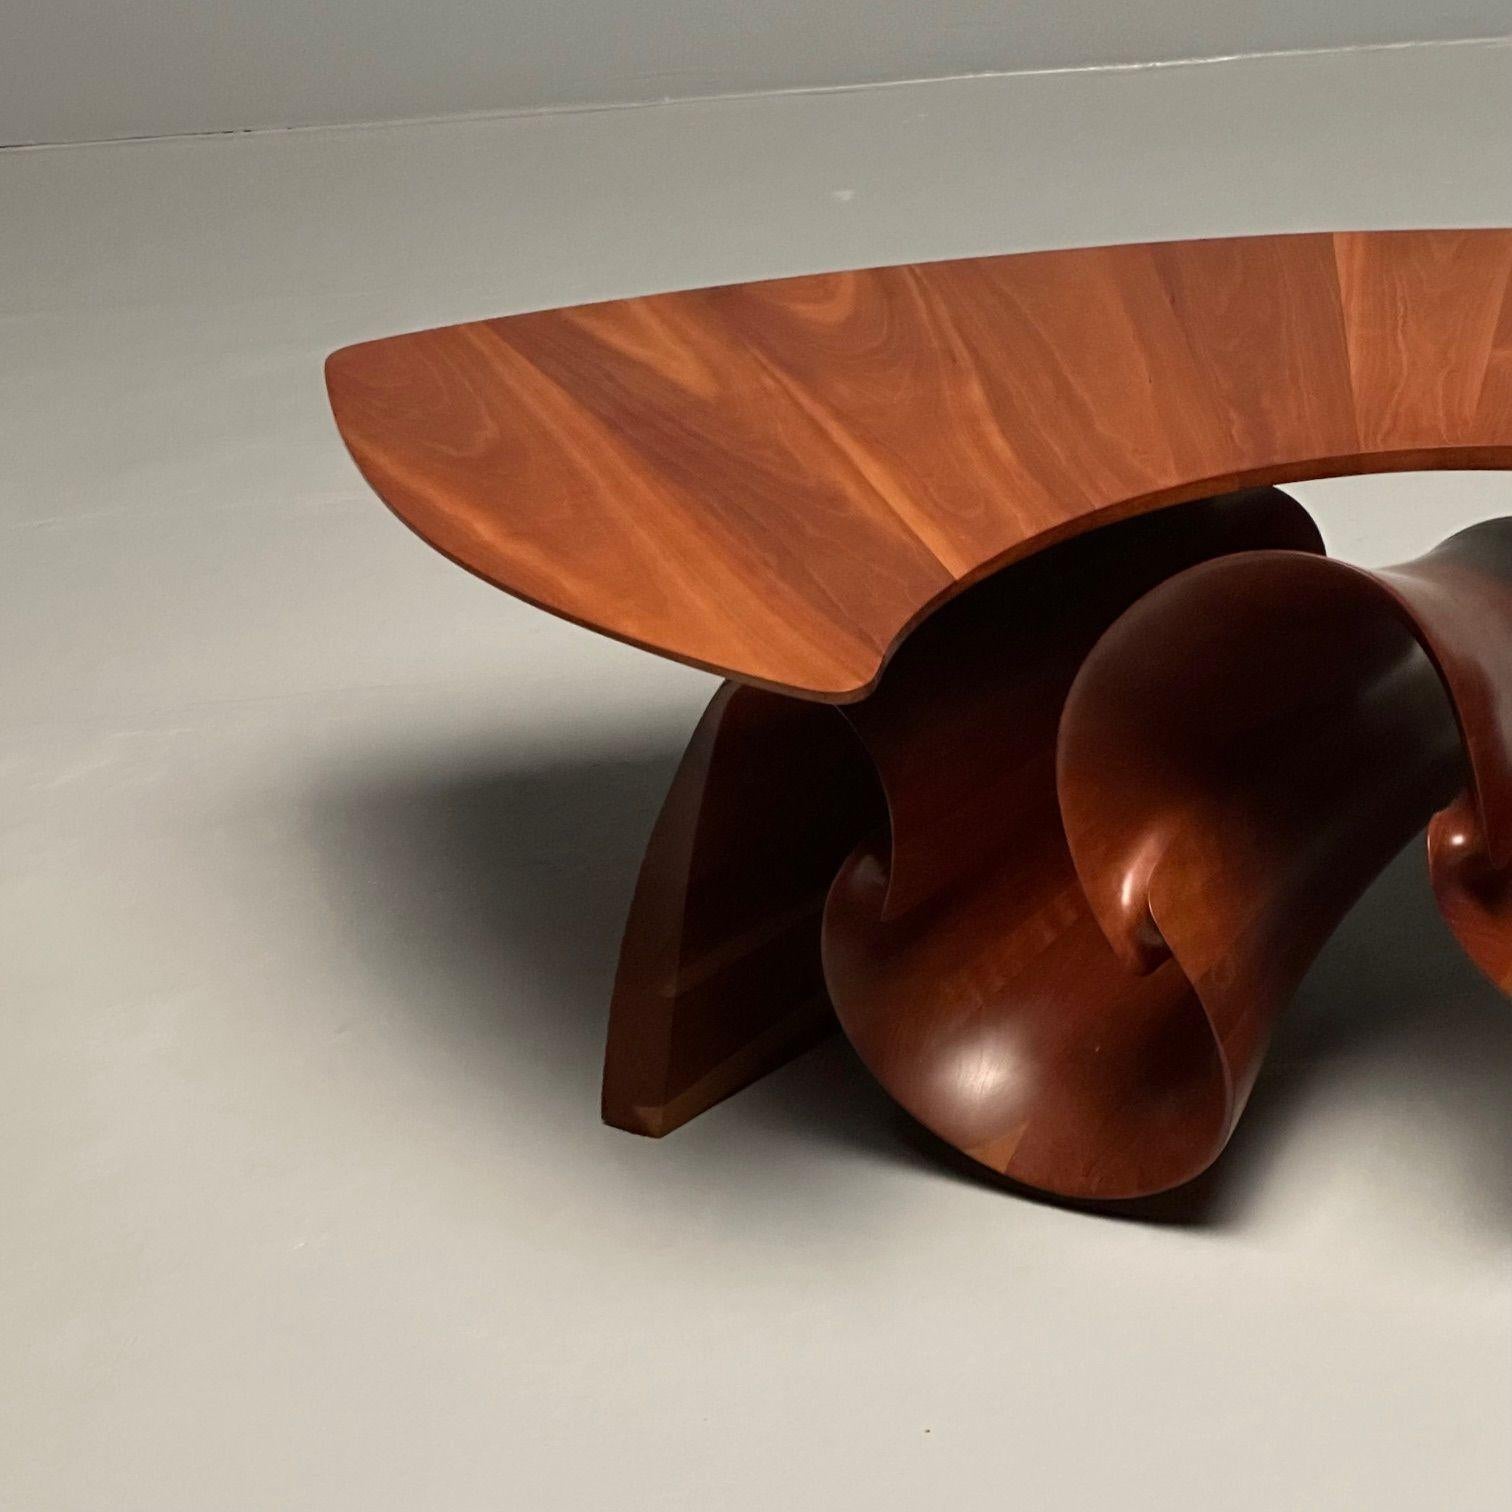 Peter Michael Adams, Mid-Century, Sculptural Coffee Table, Walnut, USA, 1970s For Sale 5